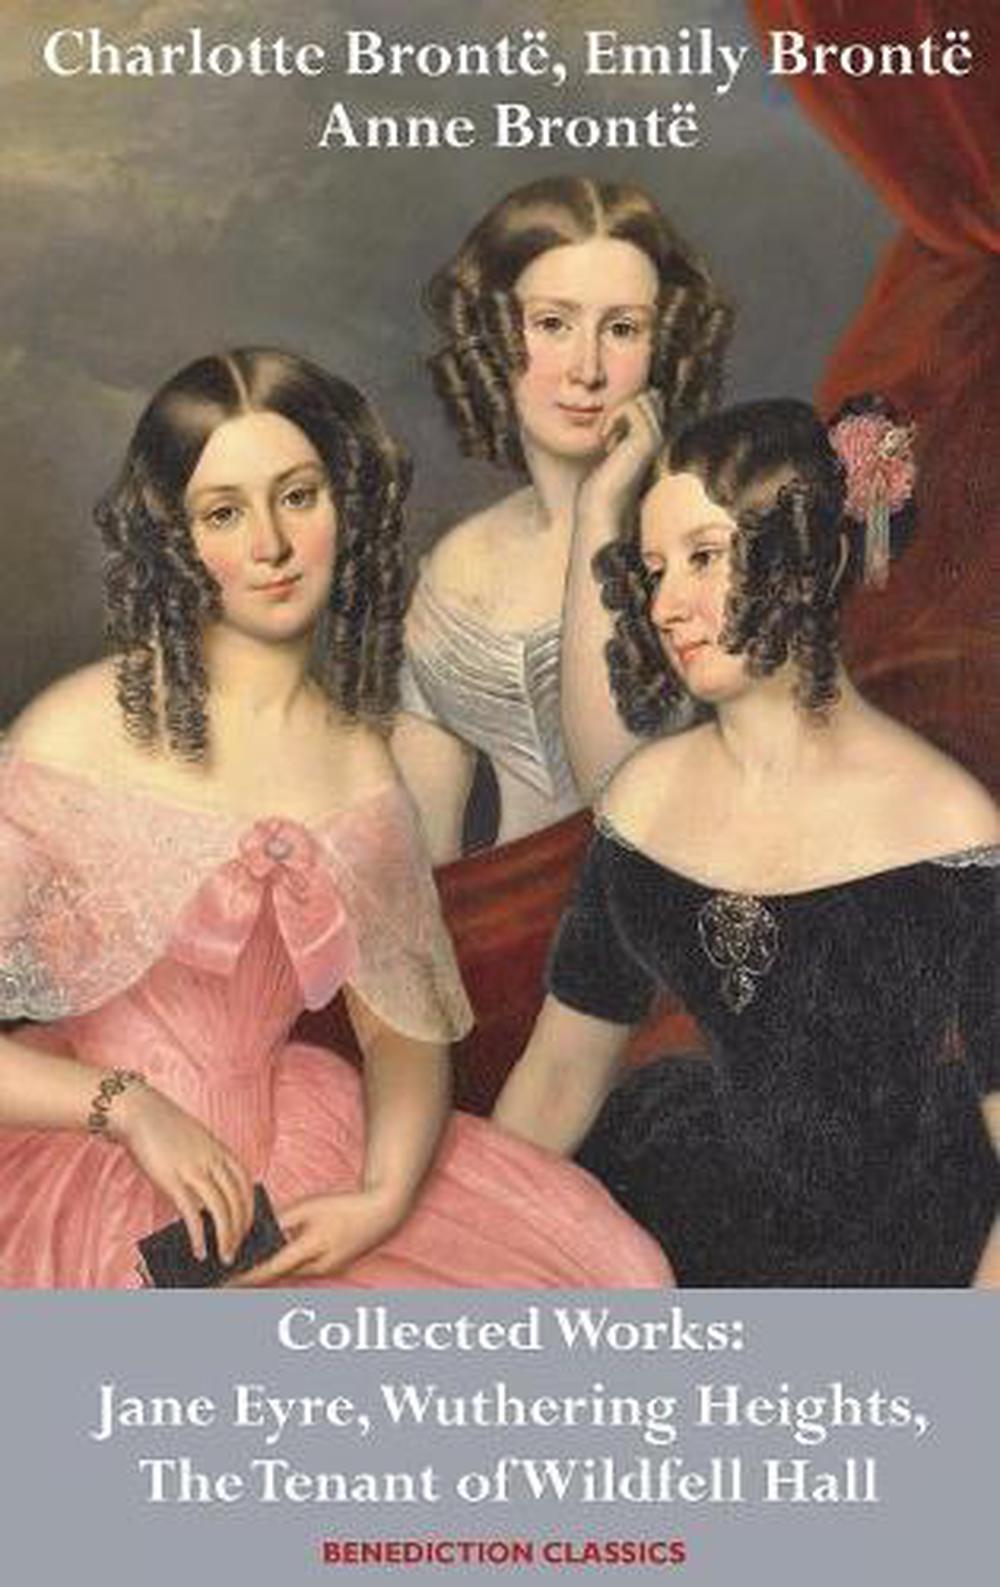 Charlotte Bronte, Emily Bronte and Anne Bronte Collected Works Jane